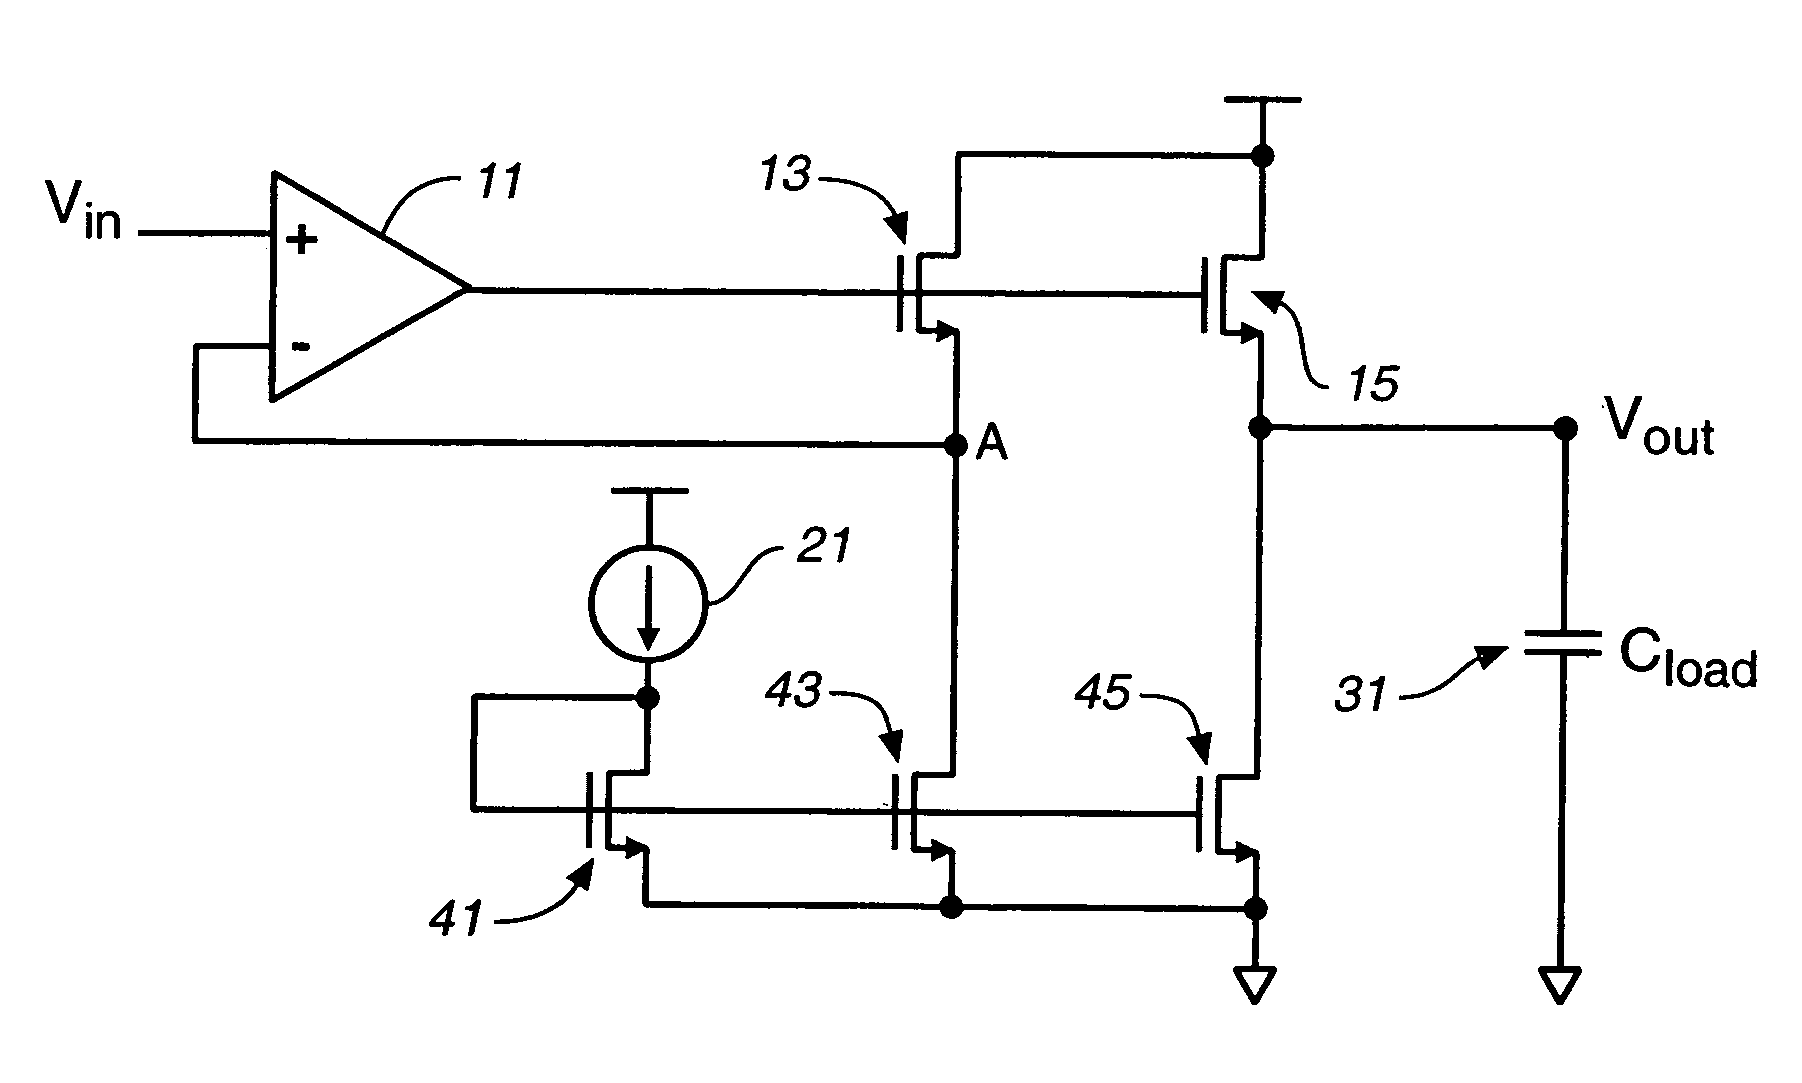 Voltage buffer for capacitive loads